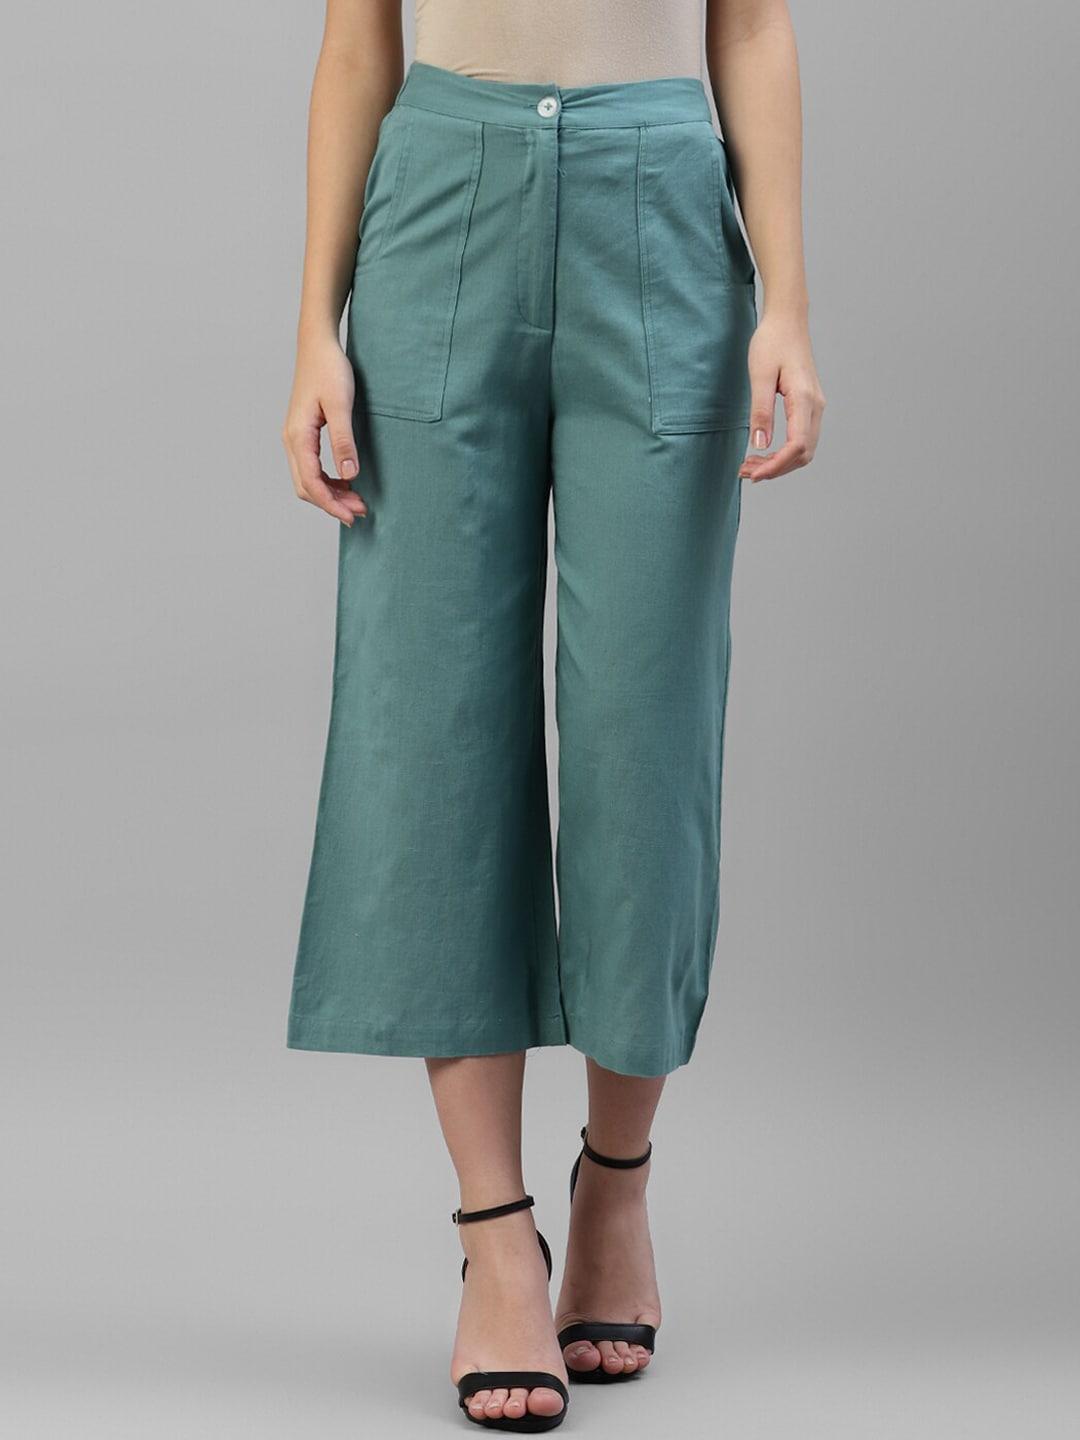 deebaco women relaxed high-rise culottes trousers